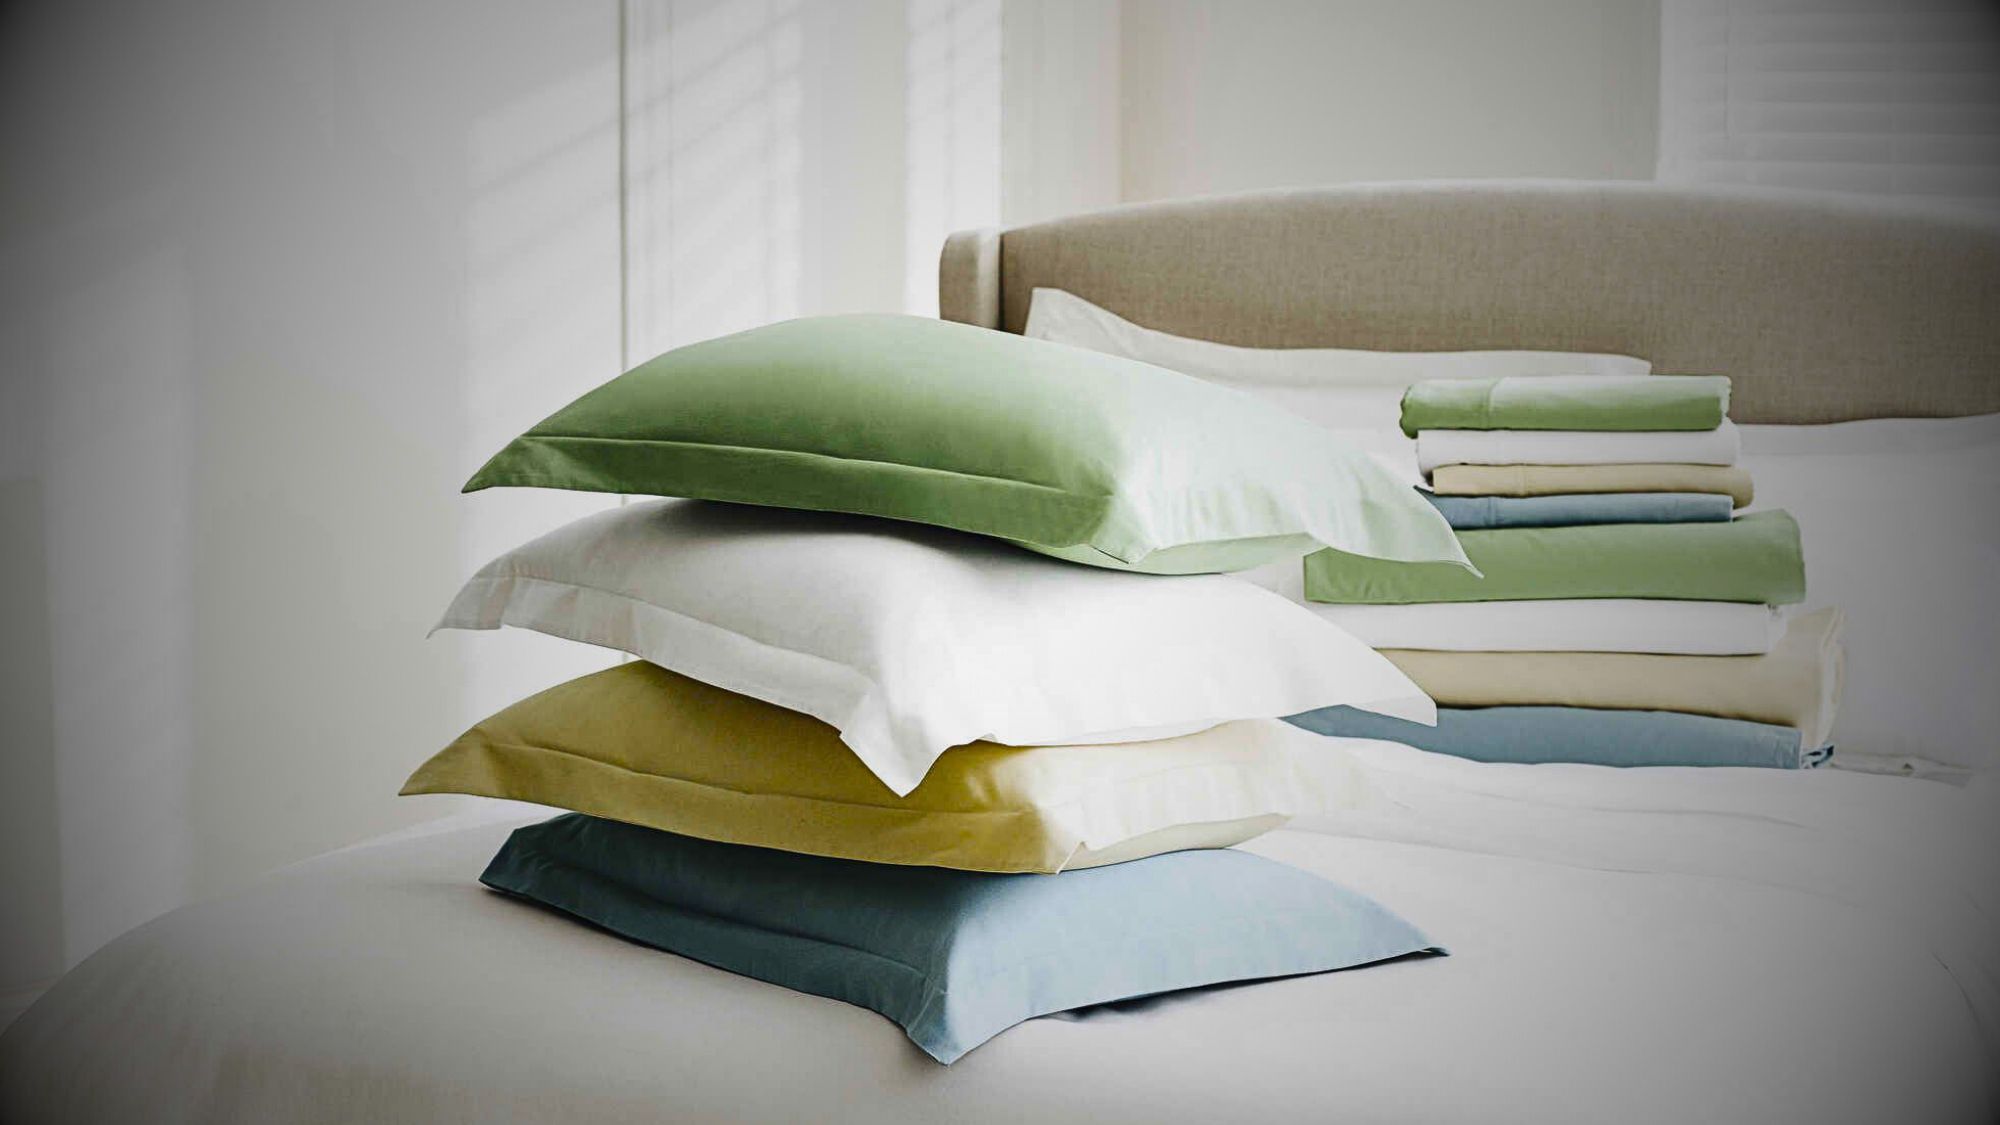 A neatly arranged stack of pillows showcasing the comfort of bedding materials